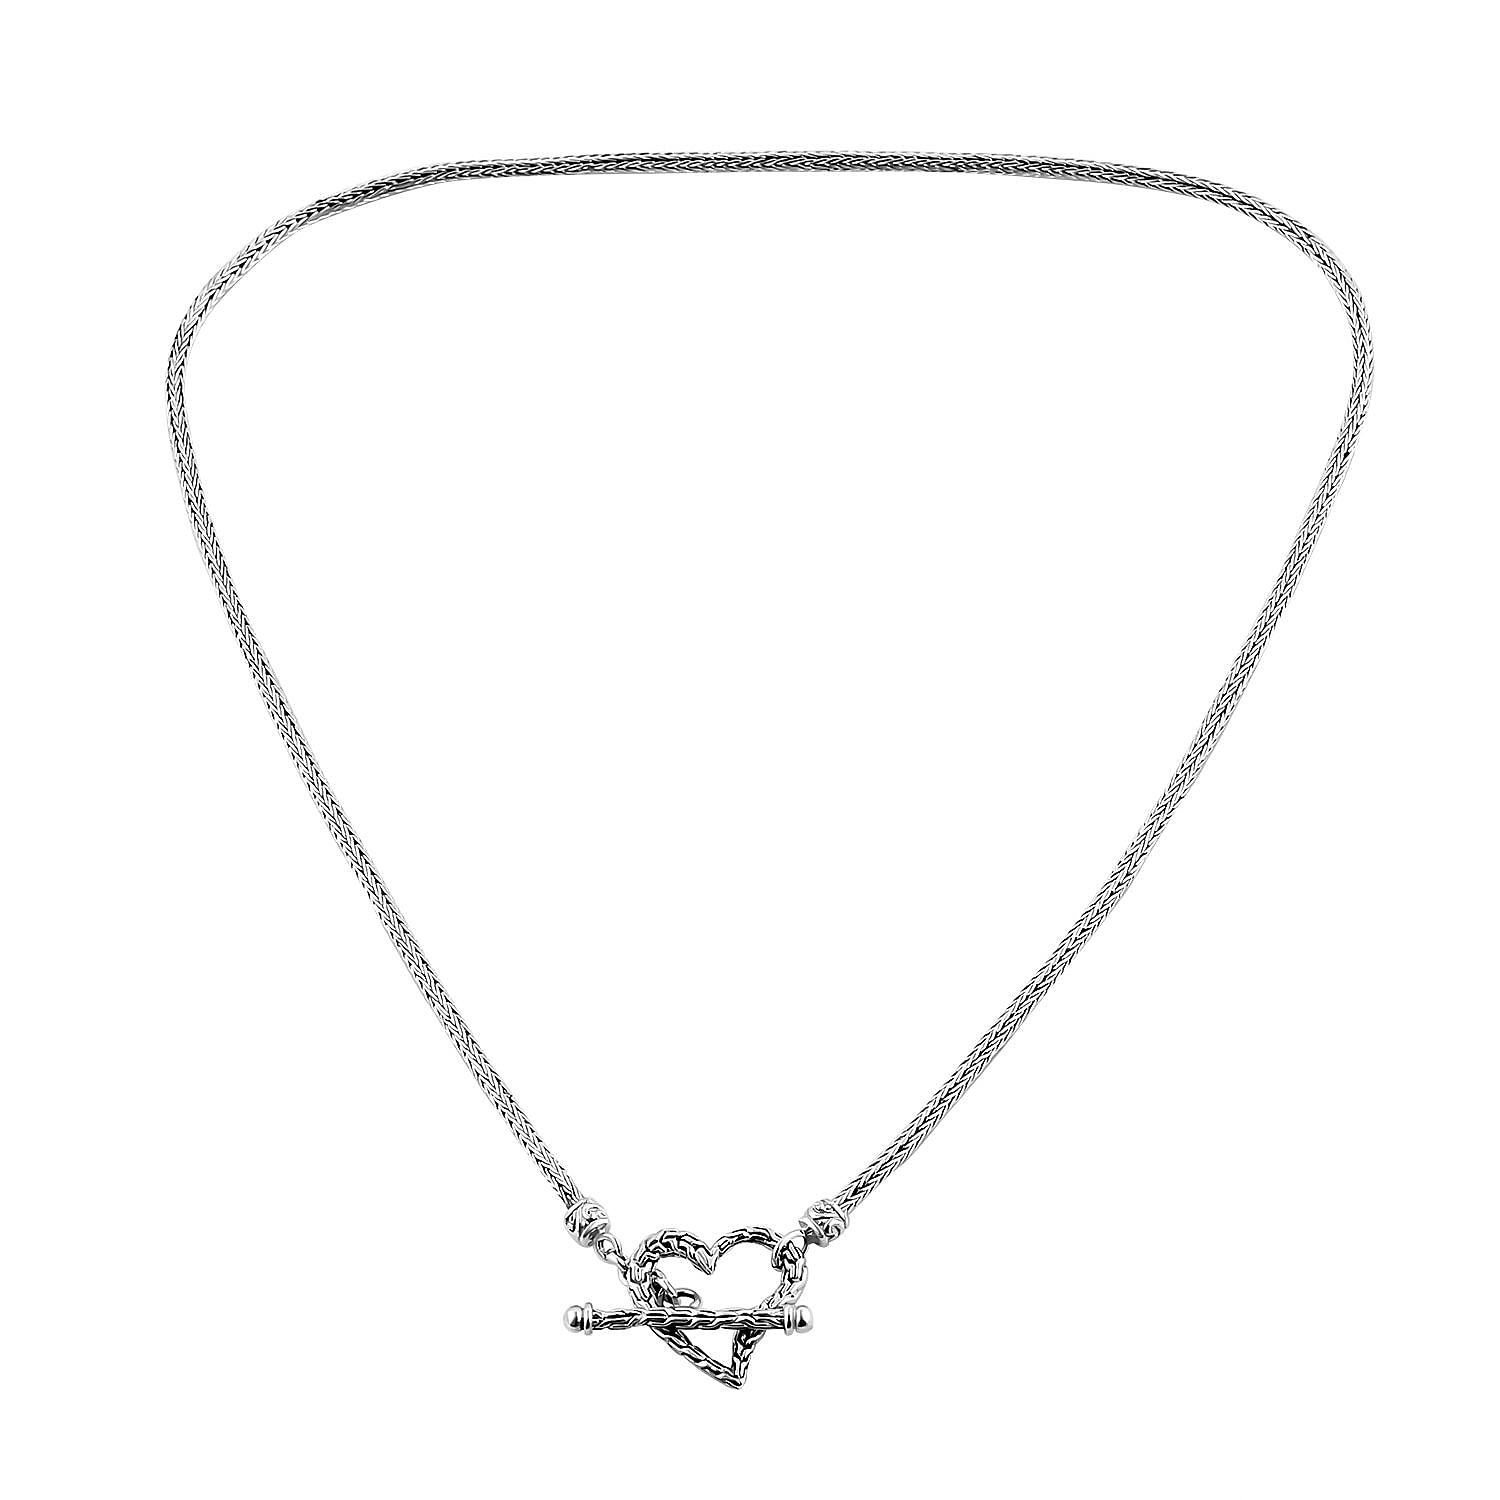 Royal Bali Collection - Designer Inspired Artisan Crafted Heart Toggle Necklace in Sterling Silver (Size - 20), Silver Wt. 20.02 Gms